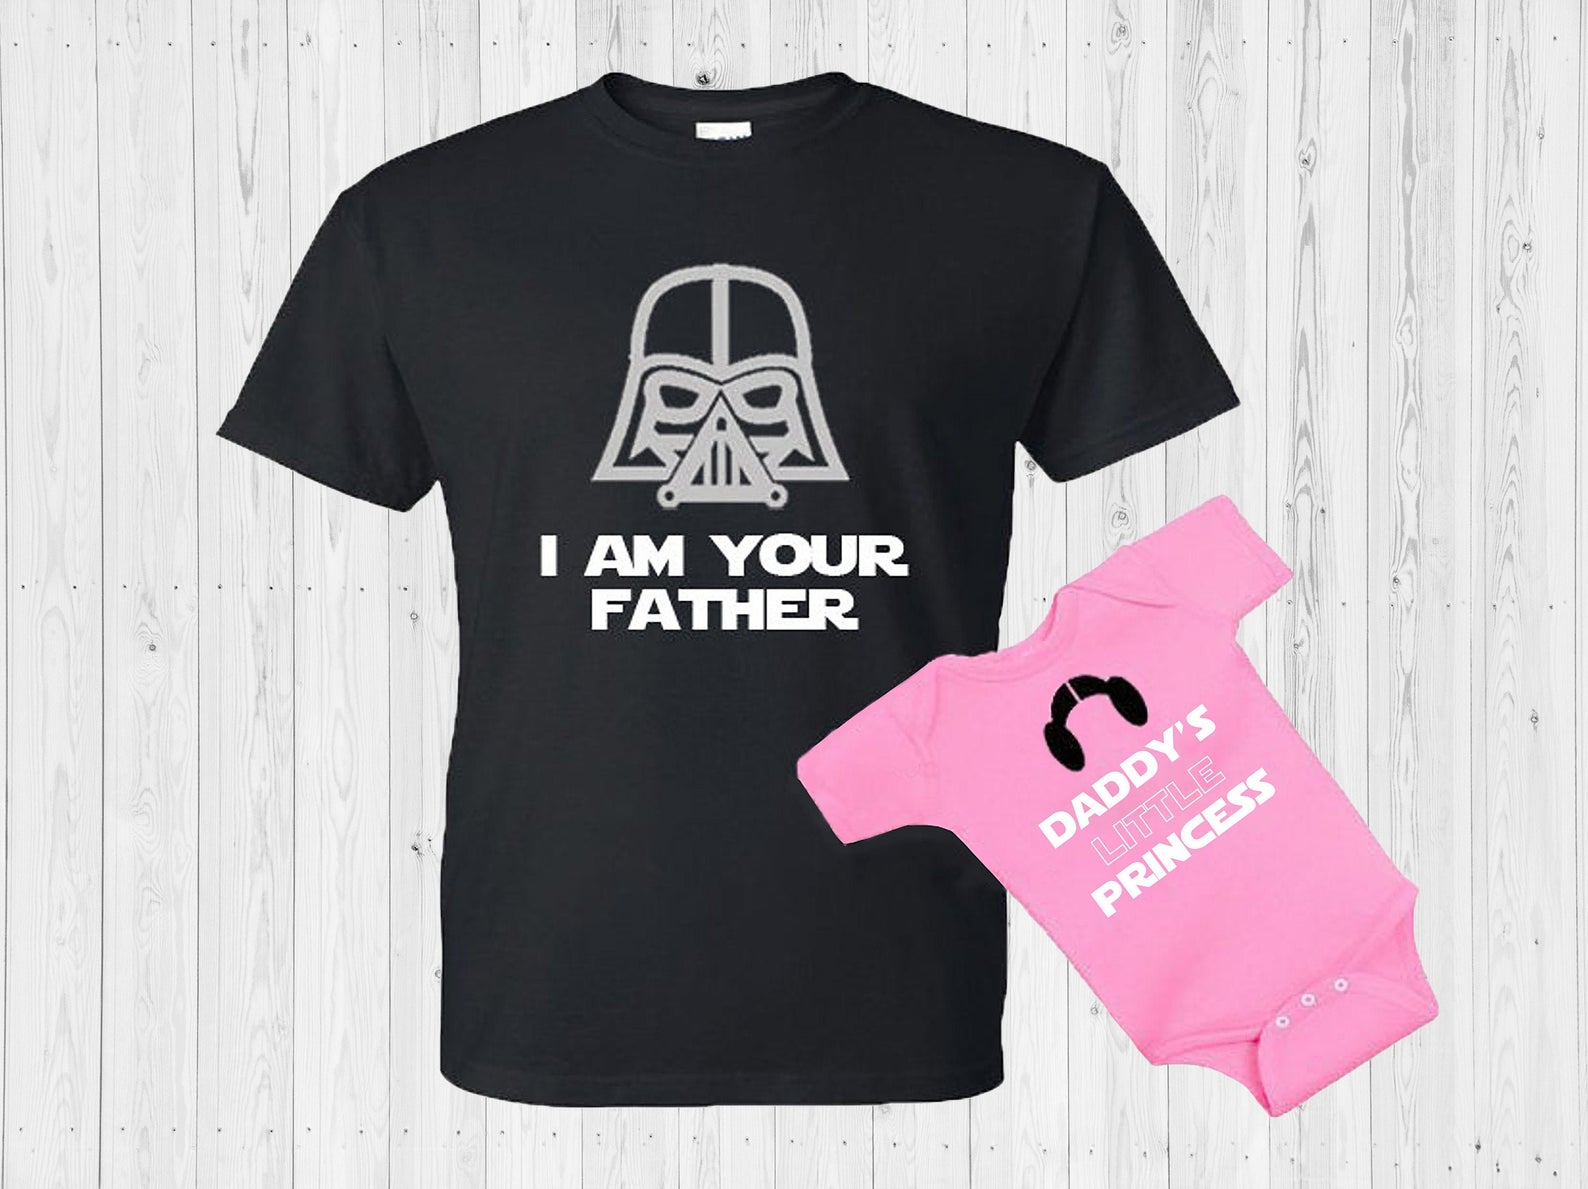 Who's Your Daddy T-Shirt - Darth Vader Funny T-Shirt